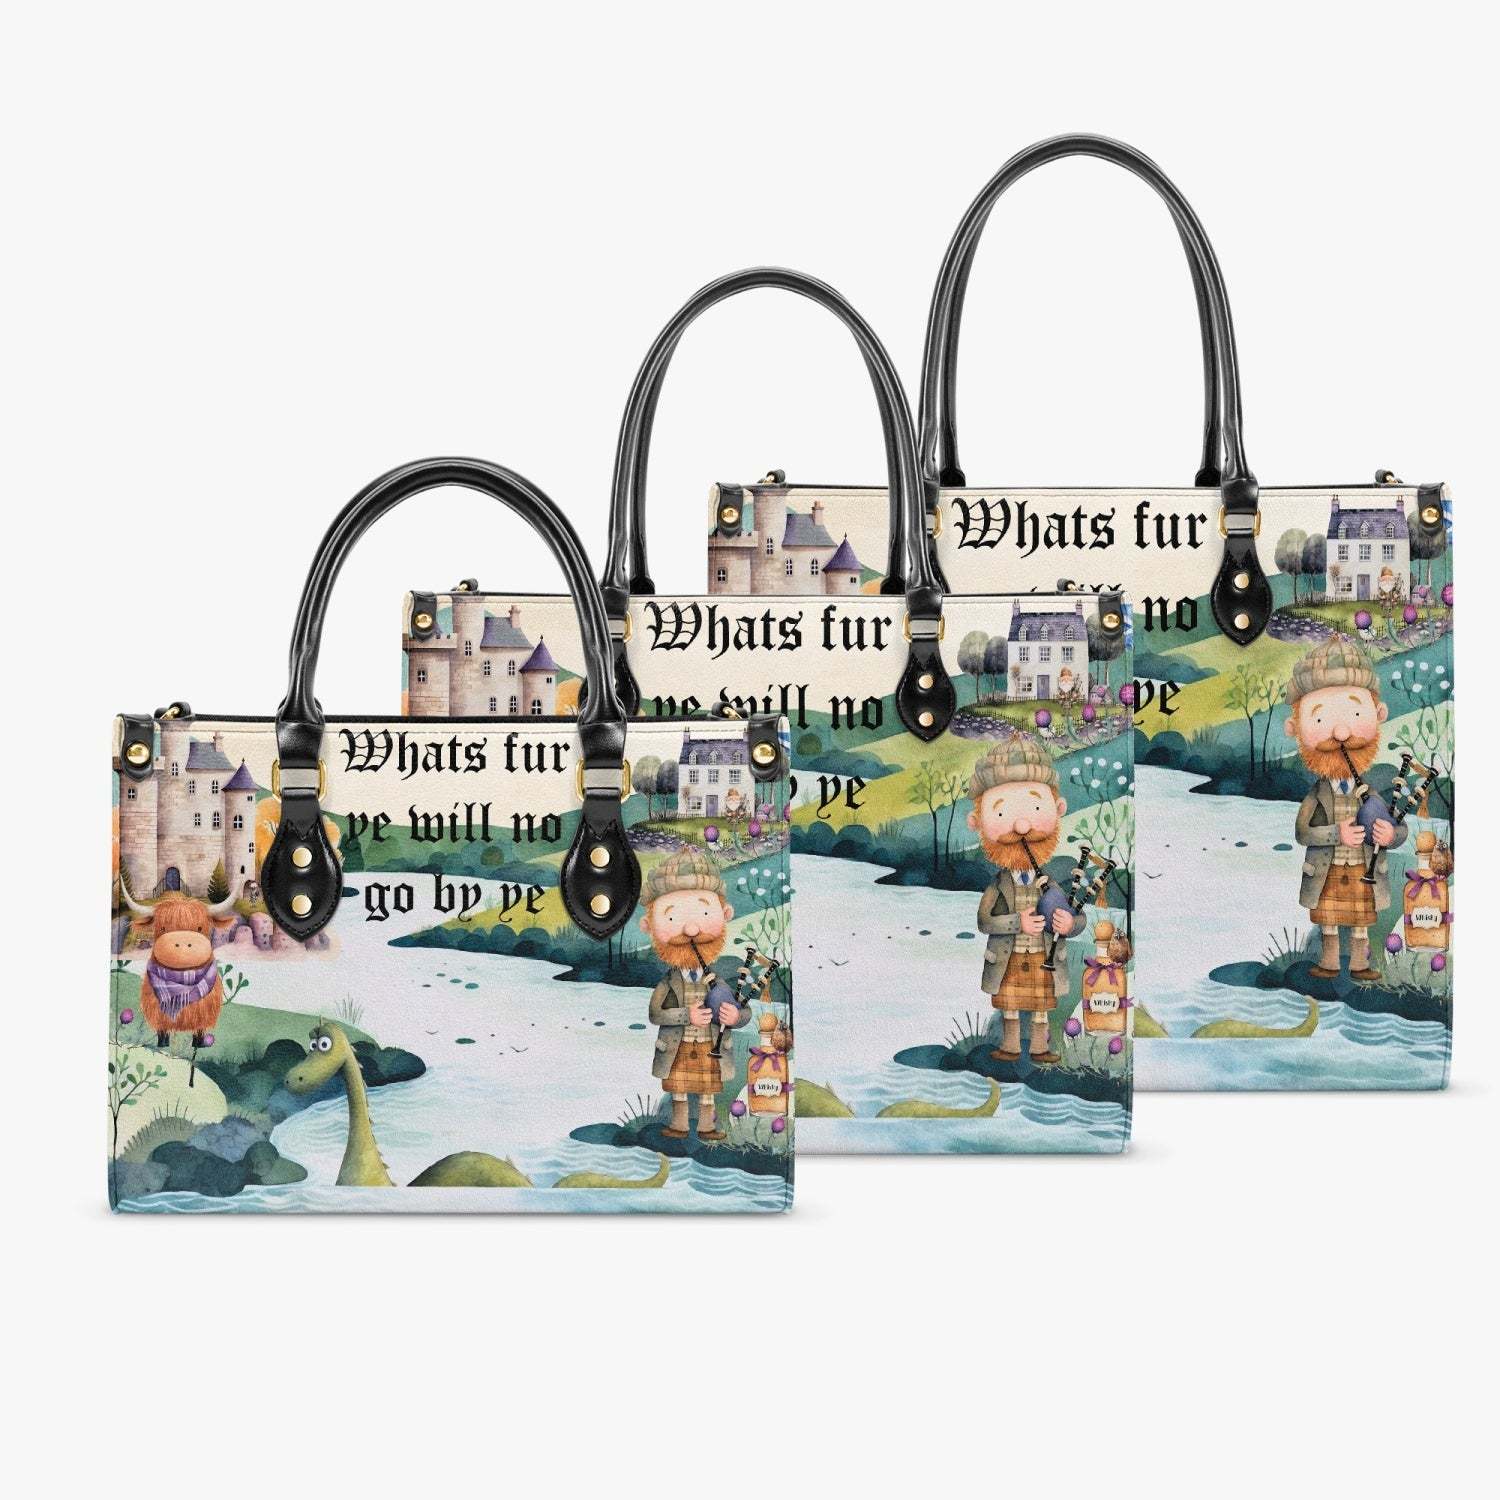 Primary image for Women's Tote Bag -Scotland - What's fur ye will no go by ye